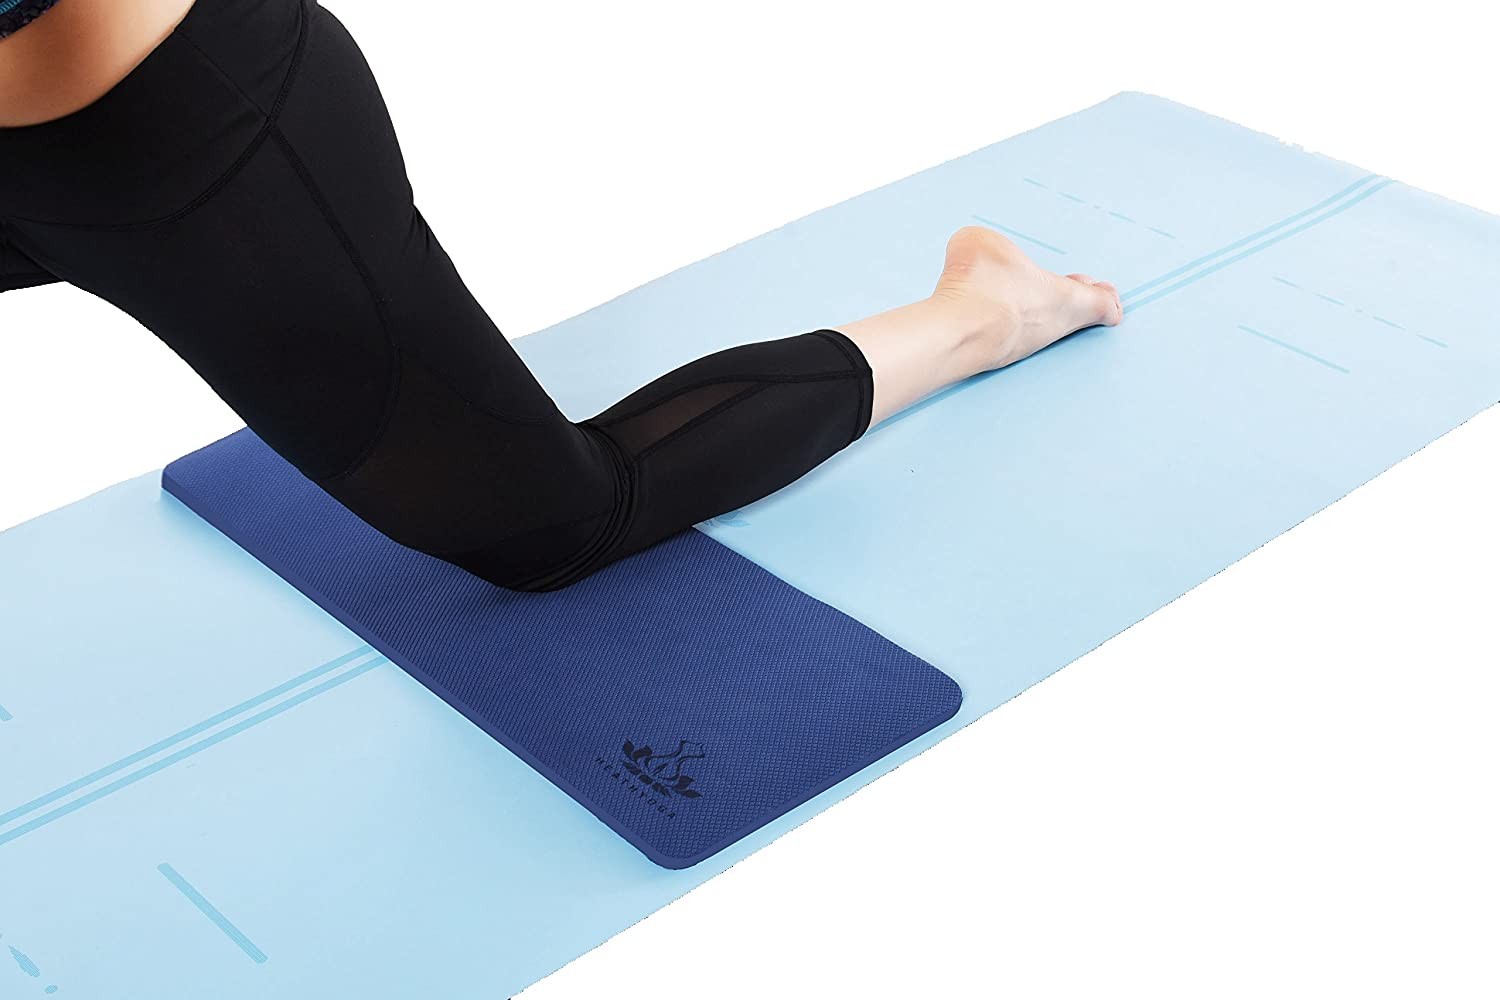 Head Wrists and Elbows 24 x 10-0.6” Thickness YOGU Yoga Knee Pad- Kinesis Yoga Knee Pad Cushion for Extra Padding and Support for Knees 